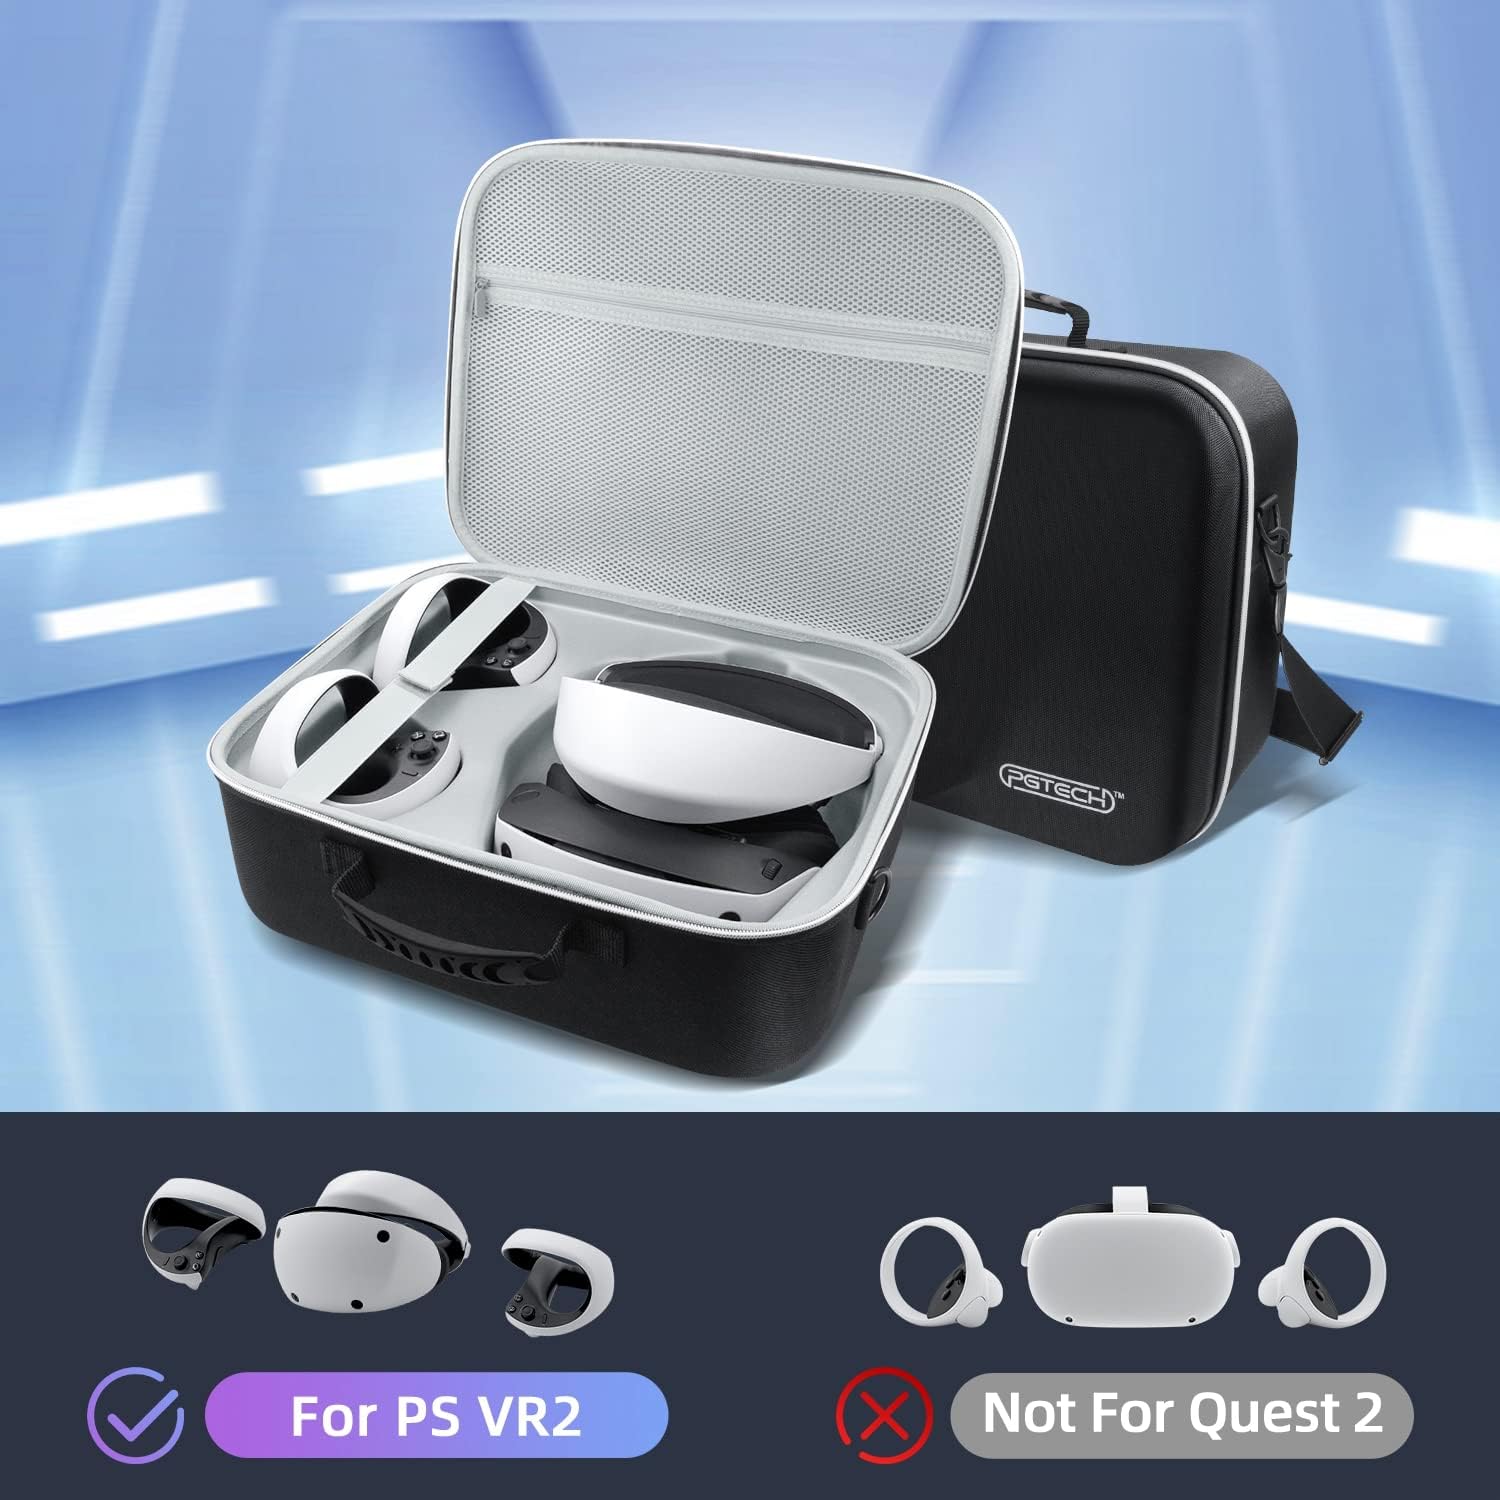 PGTECH Storage Case for PS VR2